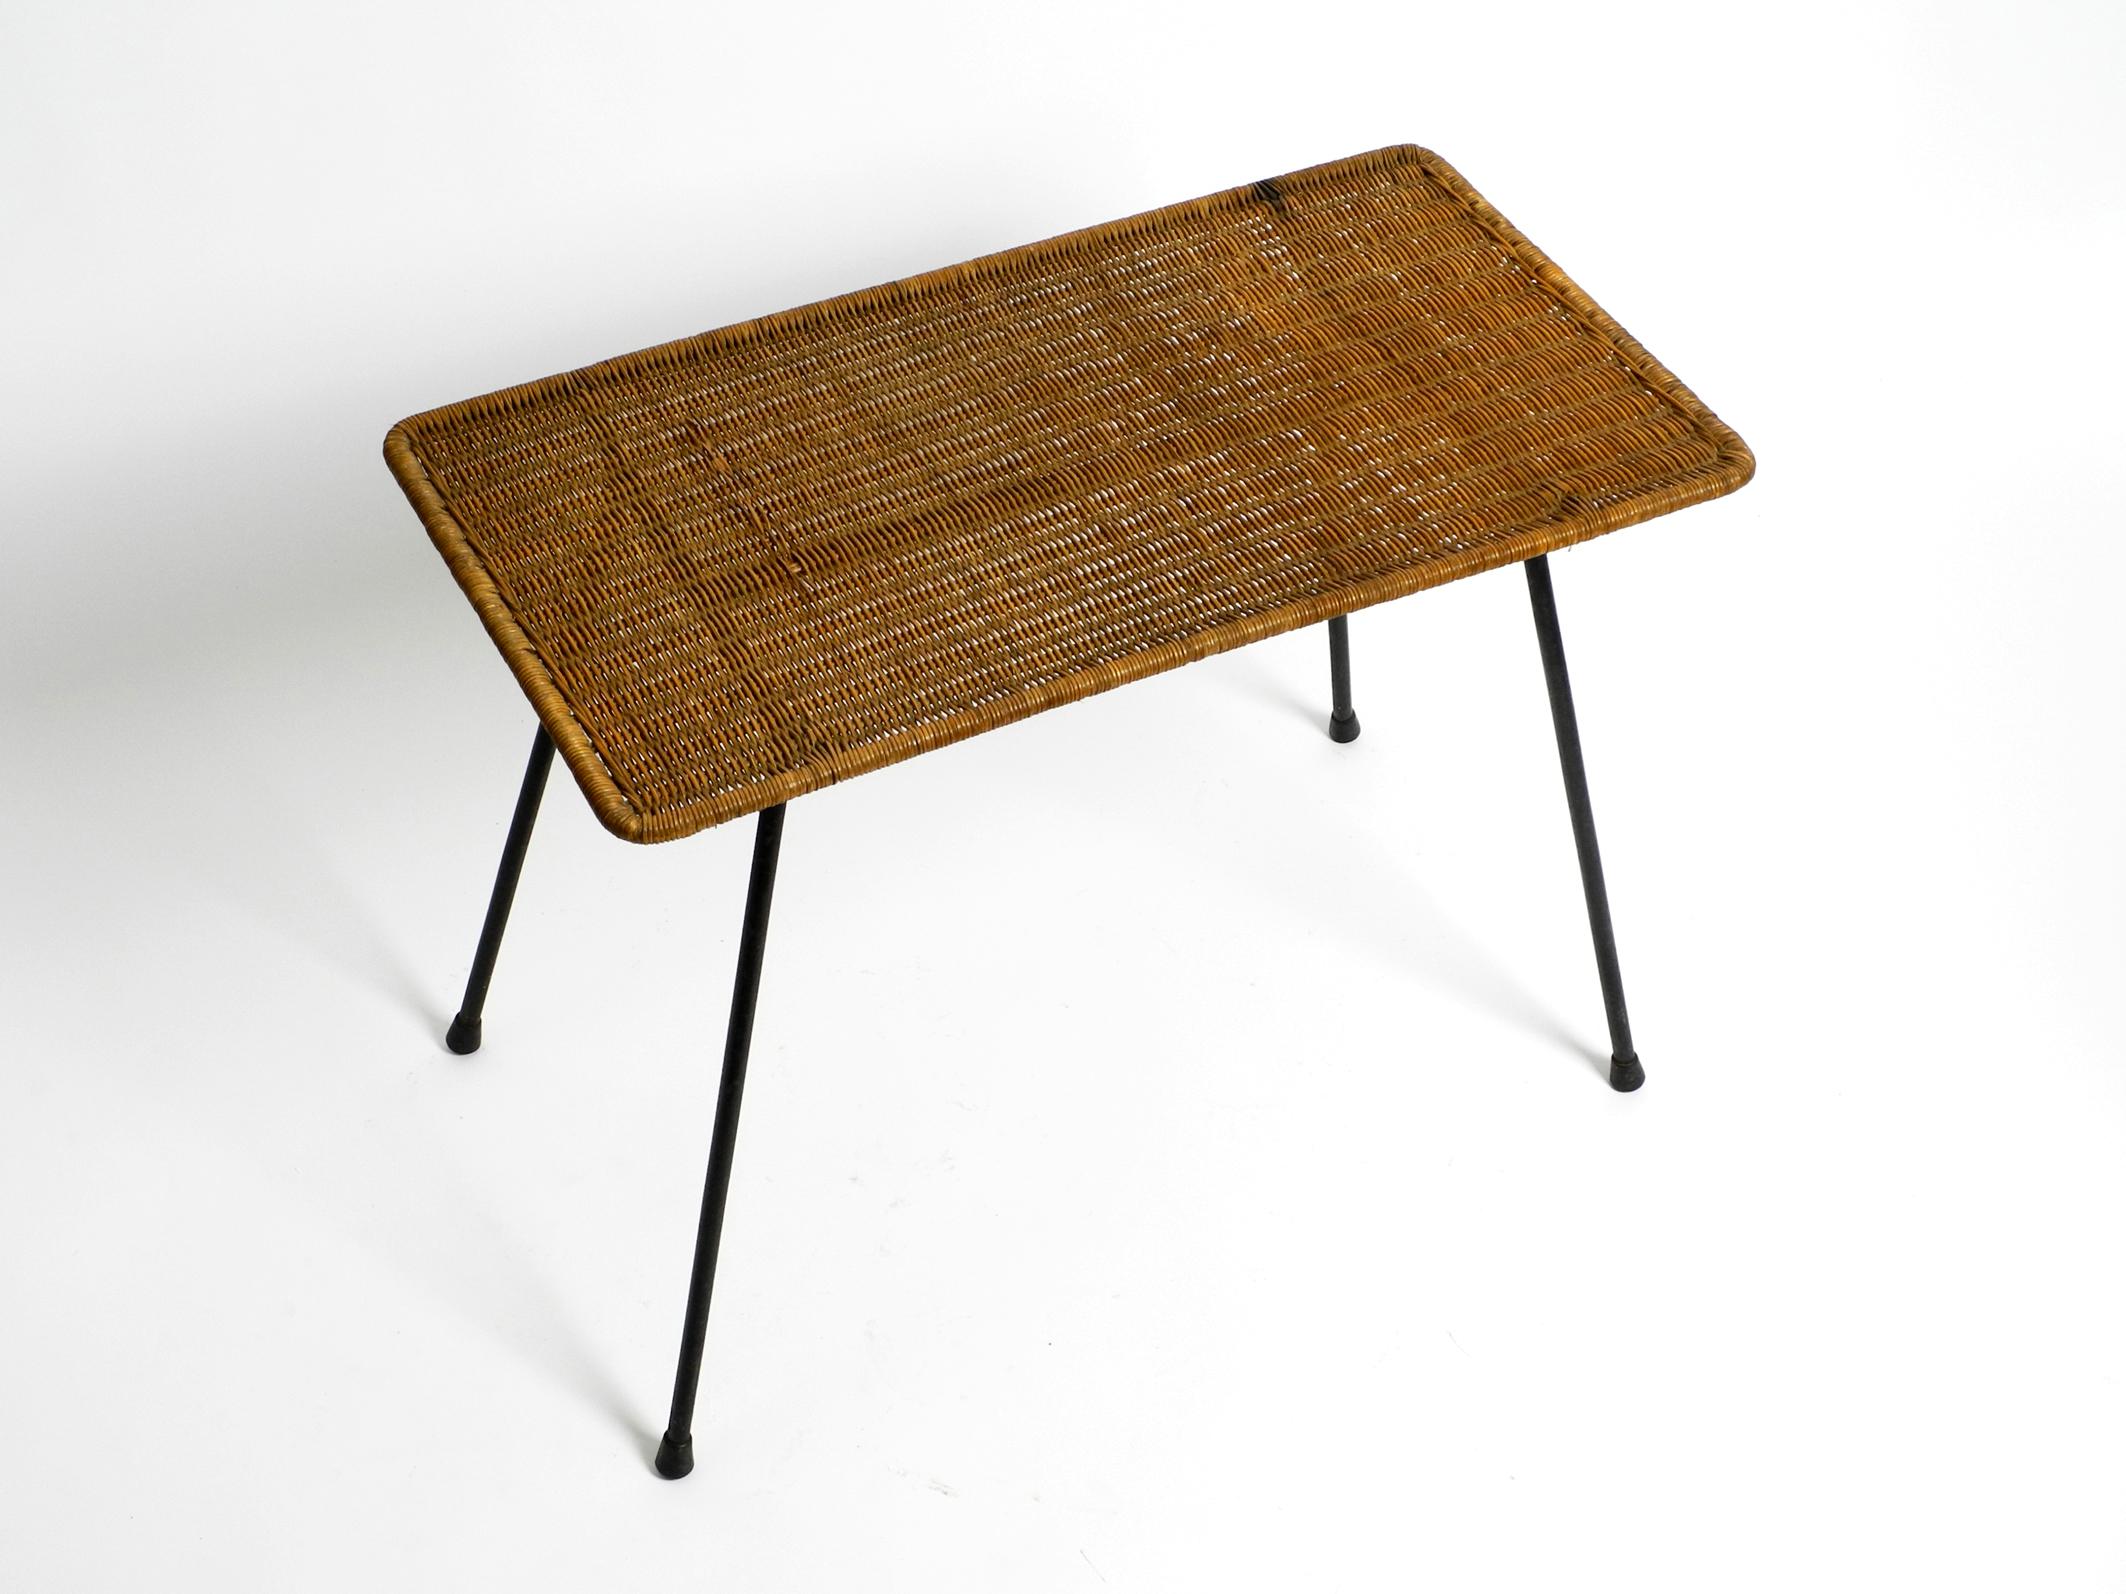 Italian Mid-Century Modern Rattan Side or Coffee Table with a Heavy Iron Frame In Good Condition For Sale In München, DE